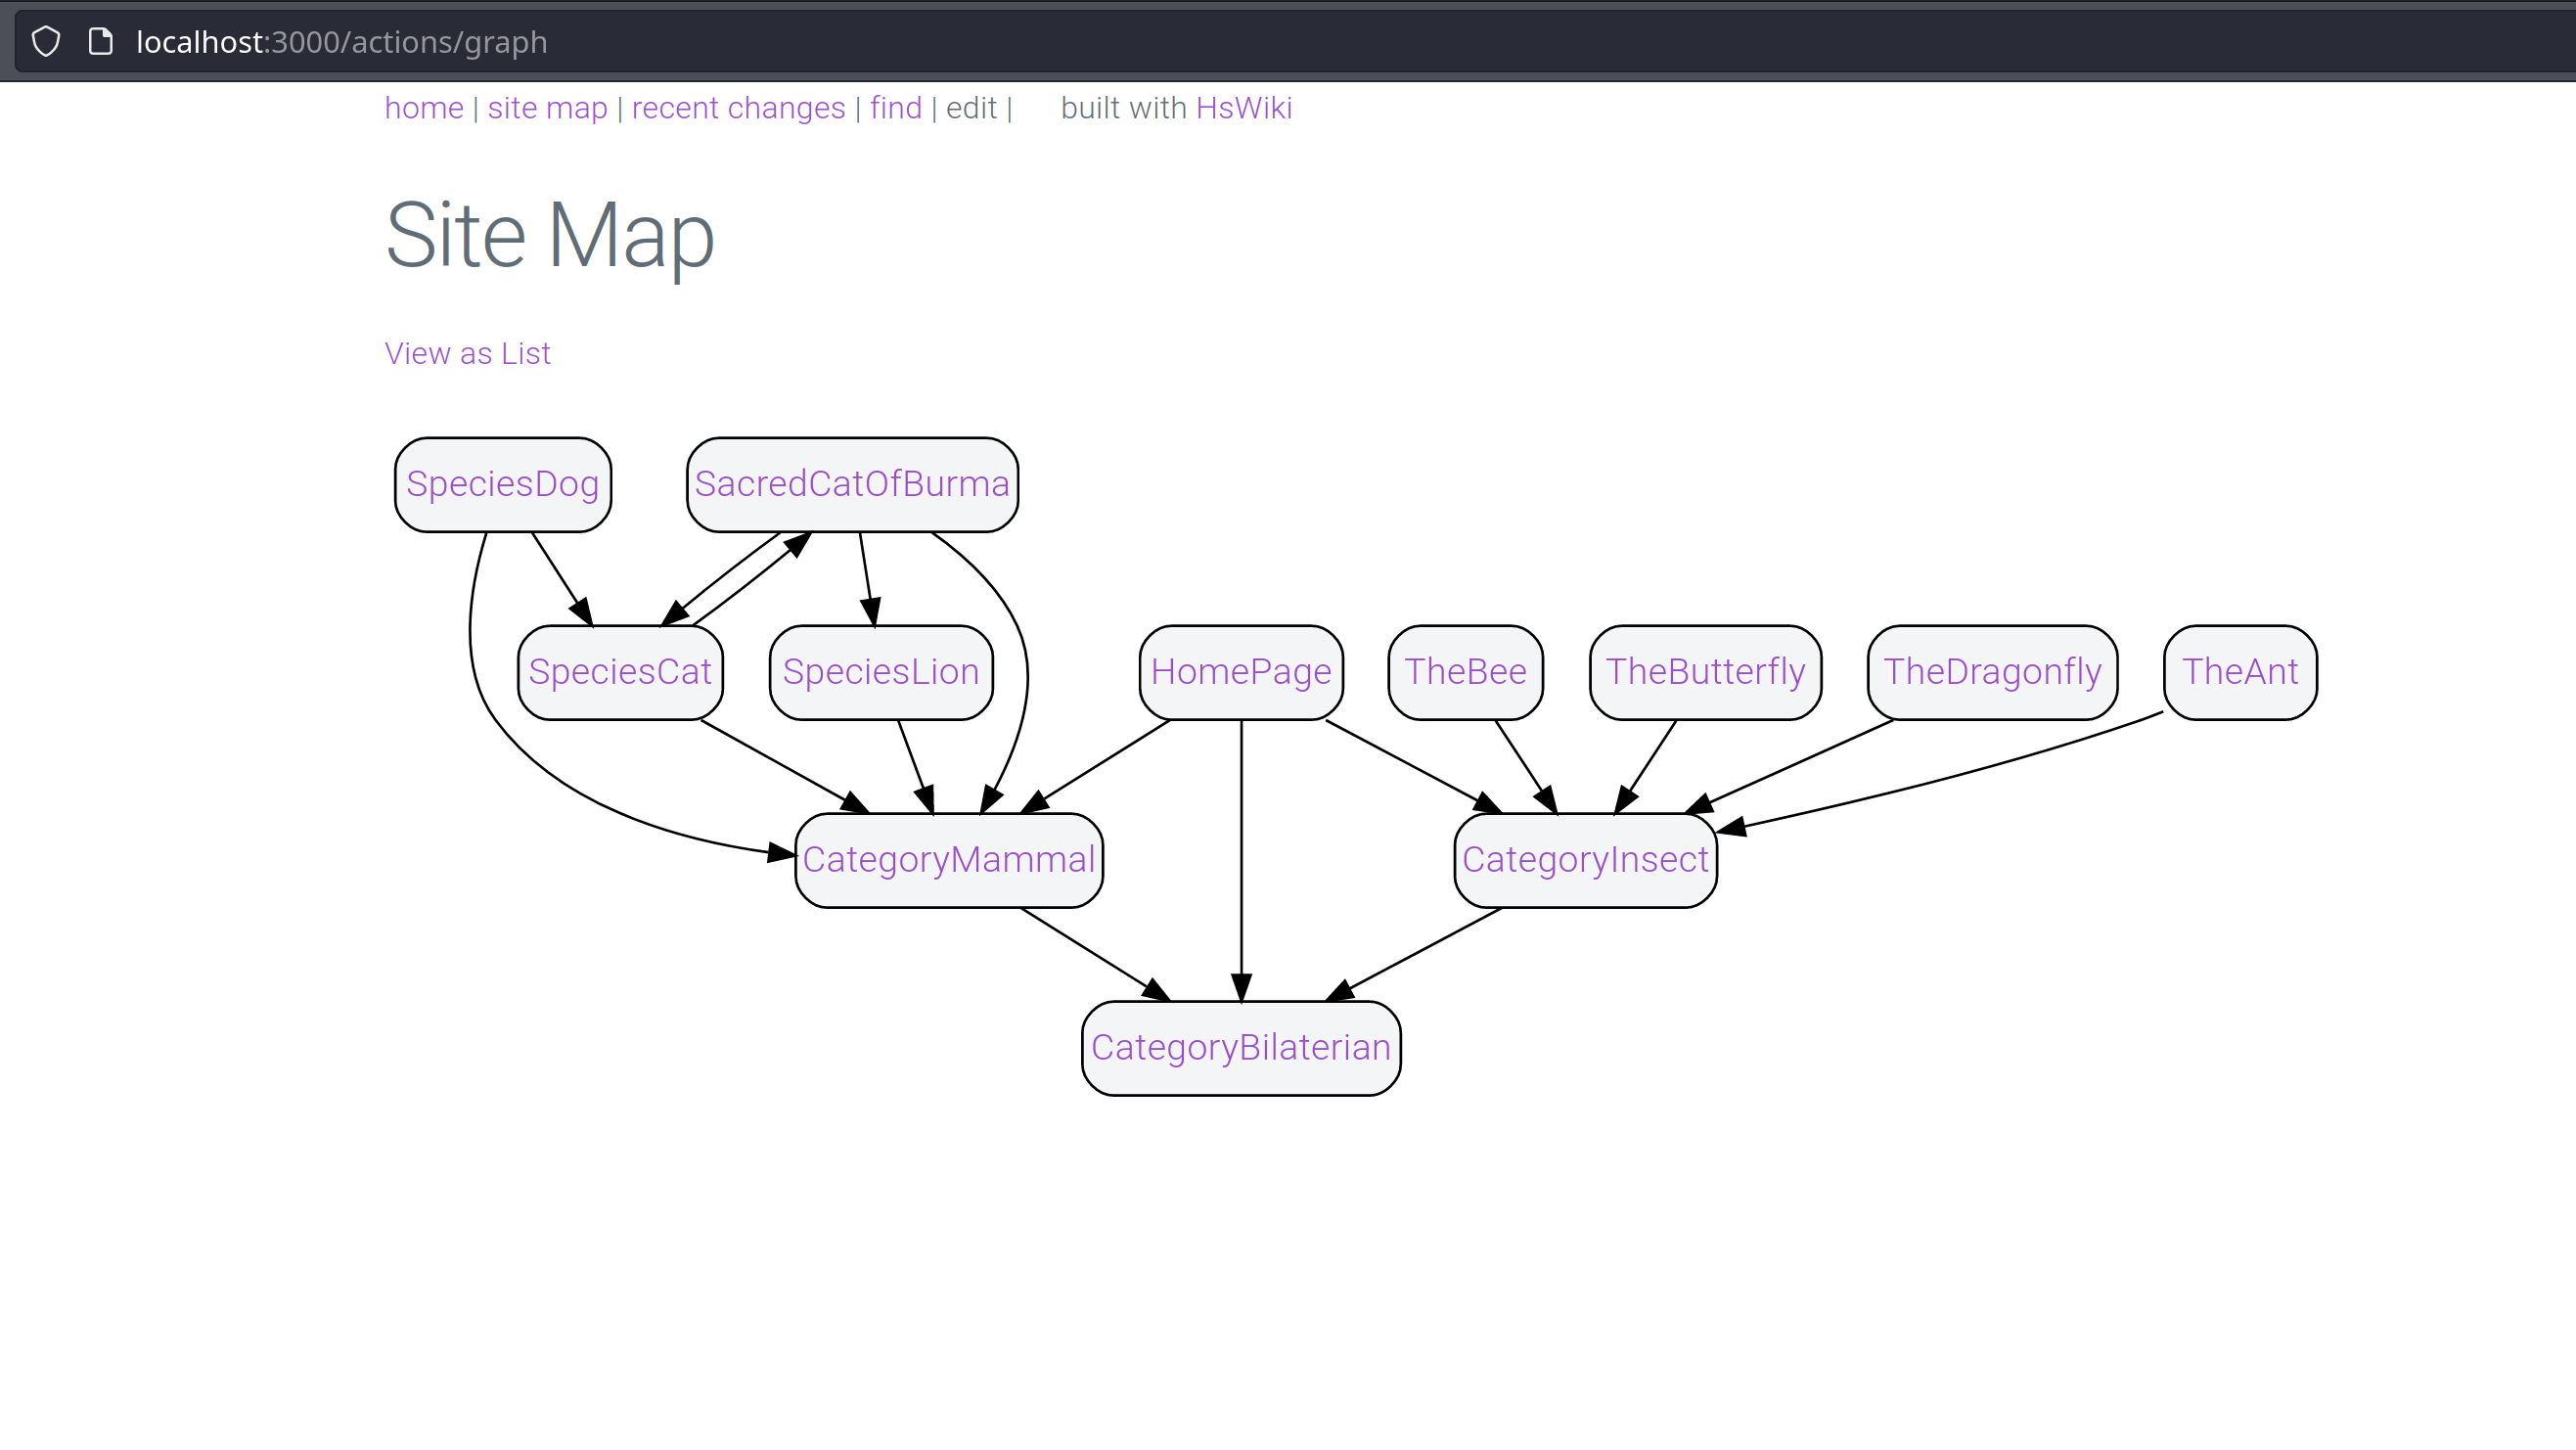 The SiteMap with a graph rendering of pages and their links